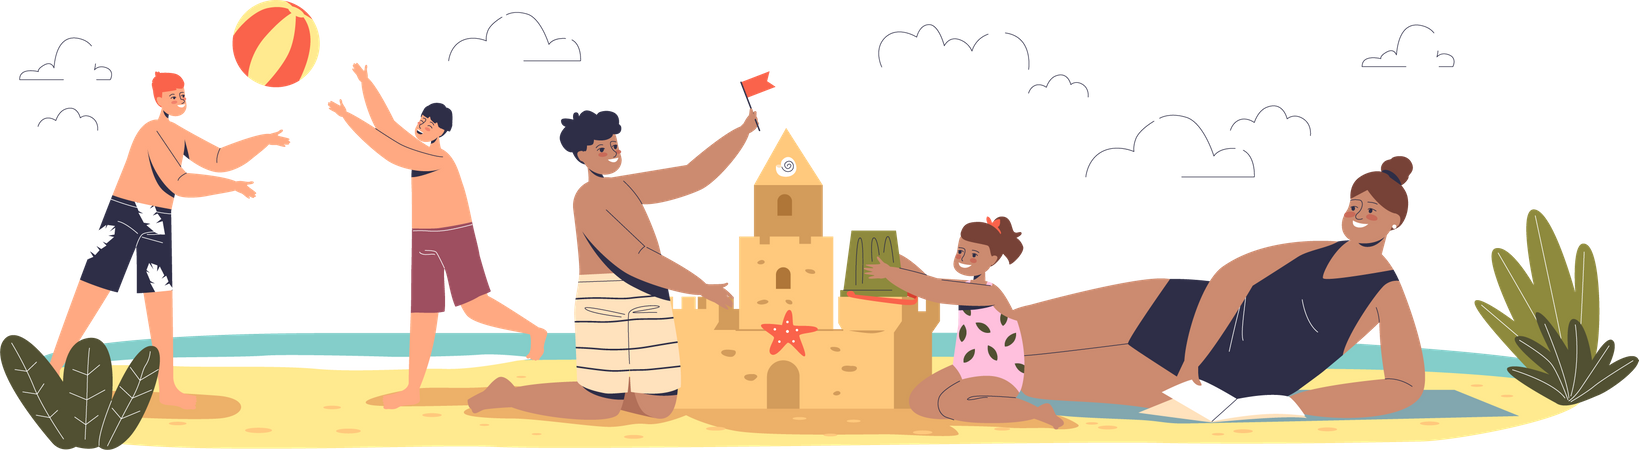 Summer vacation with kids Illustration